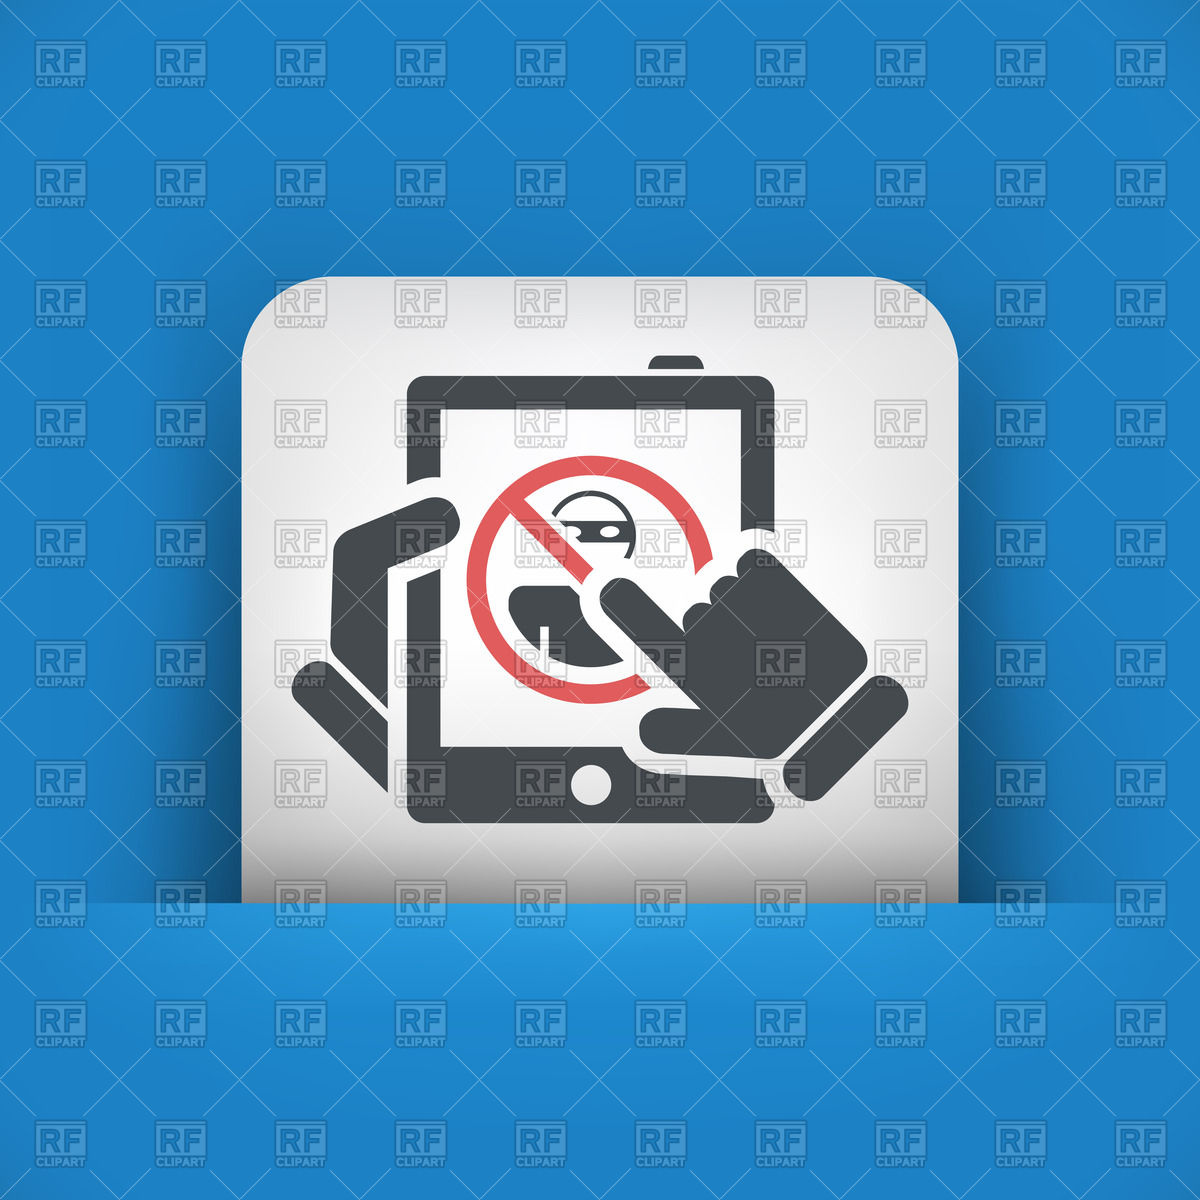 Web page data access protection icon on smartphone Vector Image.